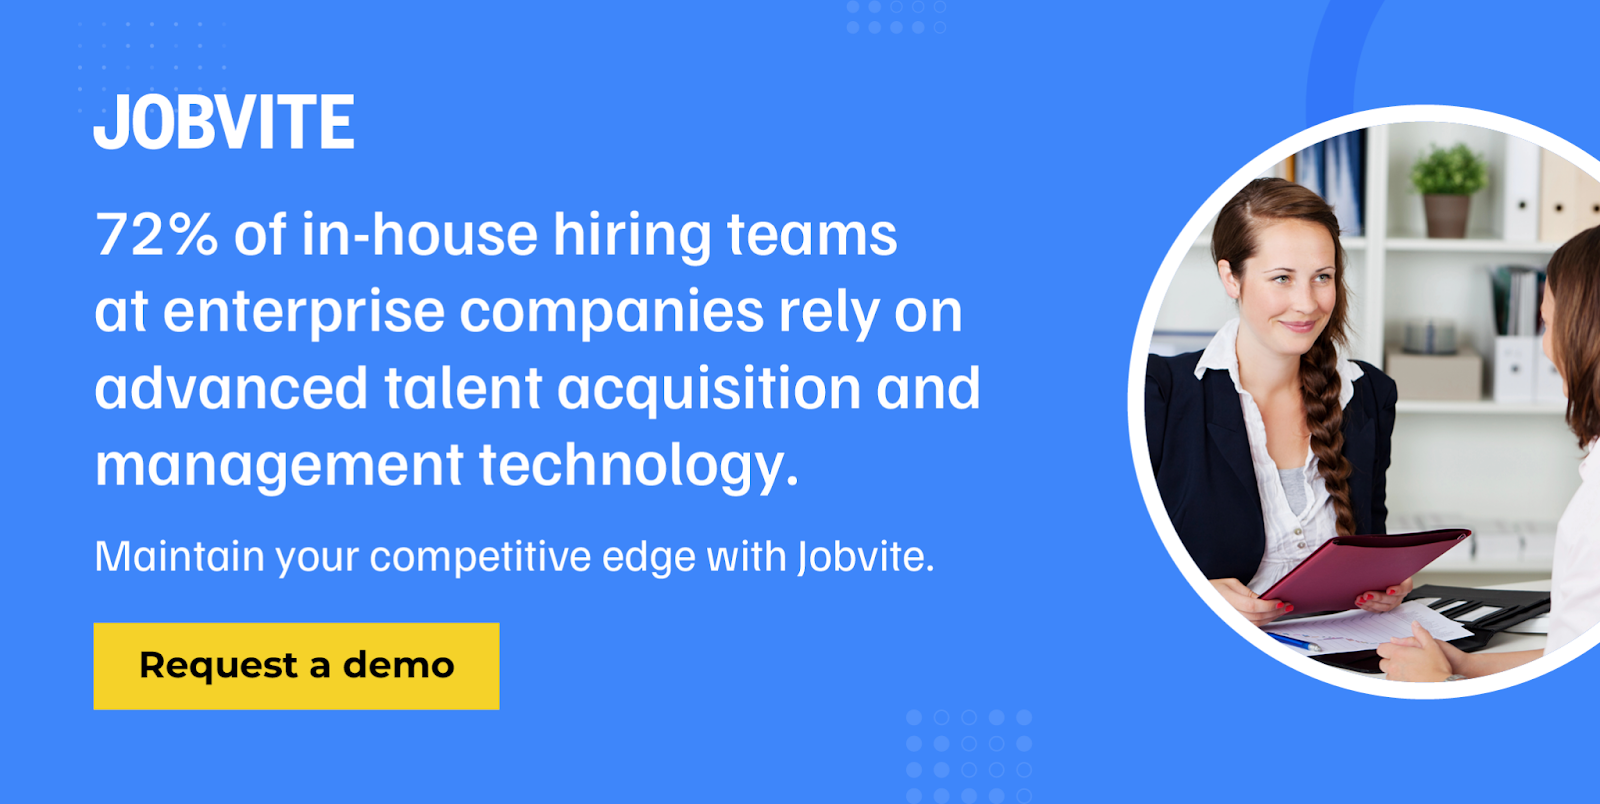 Maintain your competitive edge in recruiting with Jobvite. Click here for a demo.